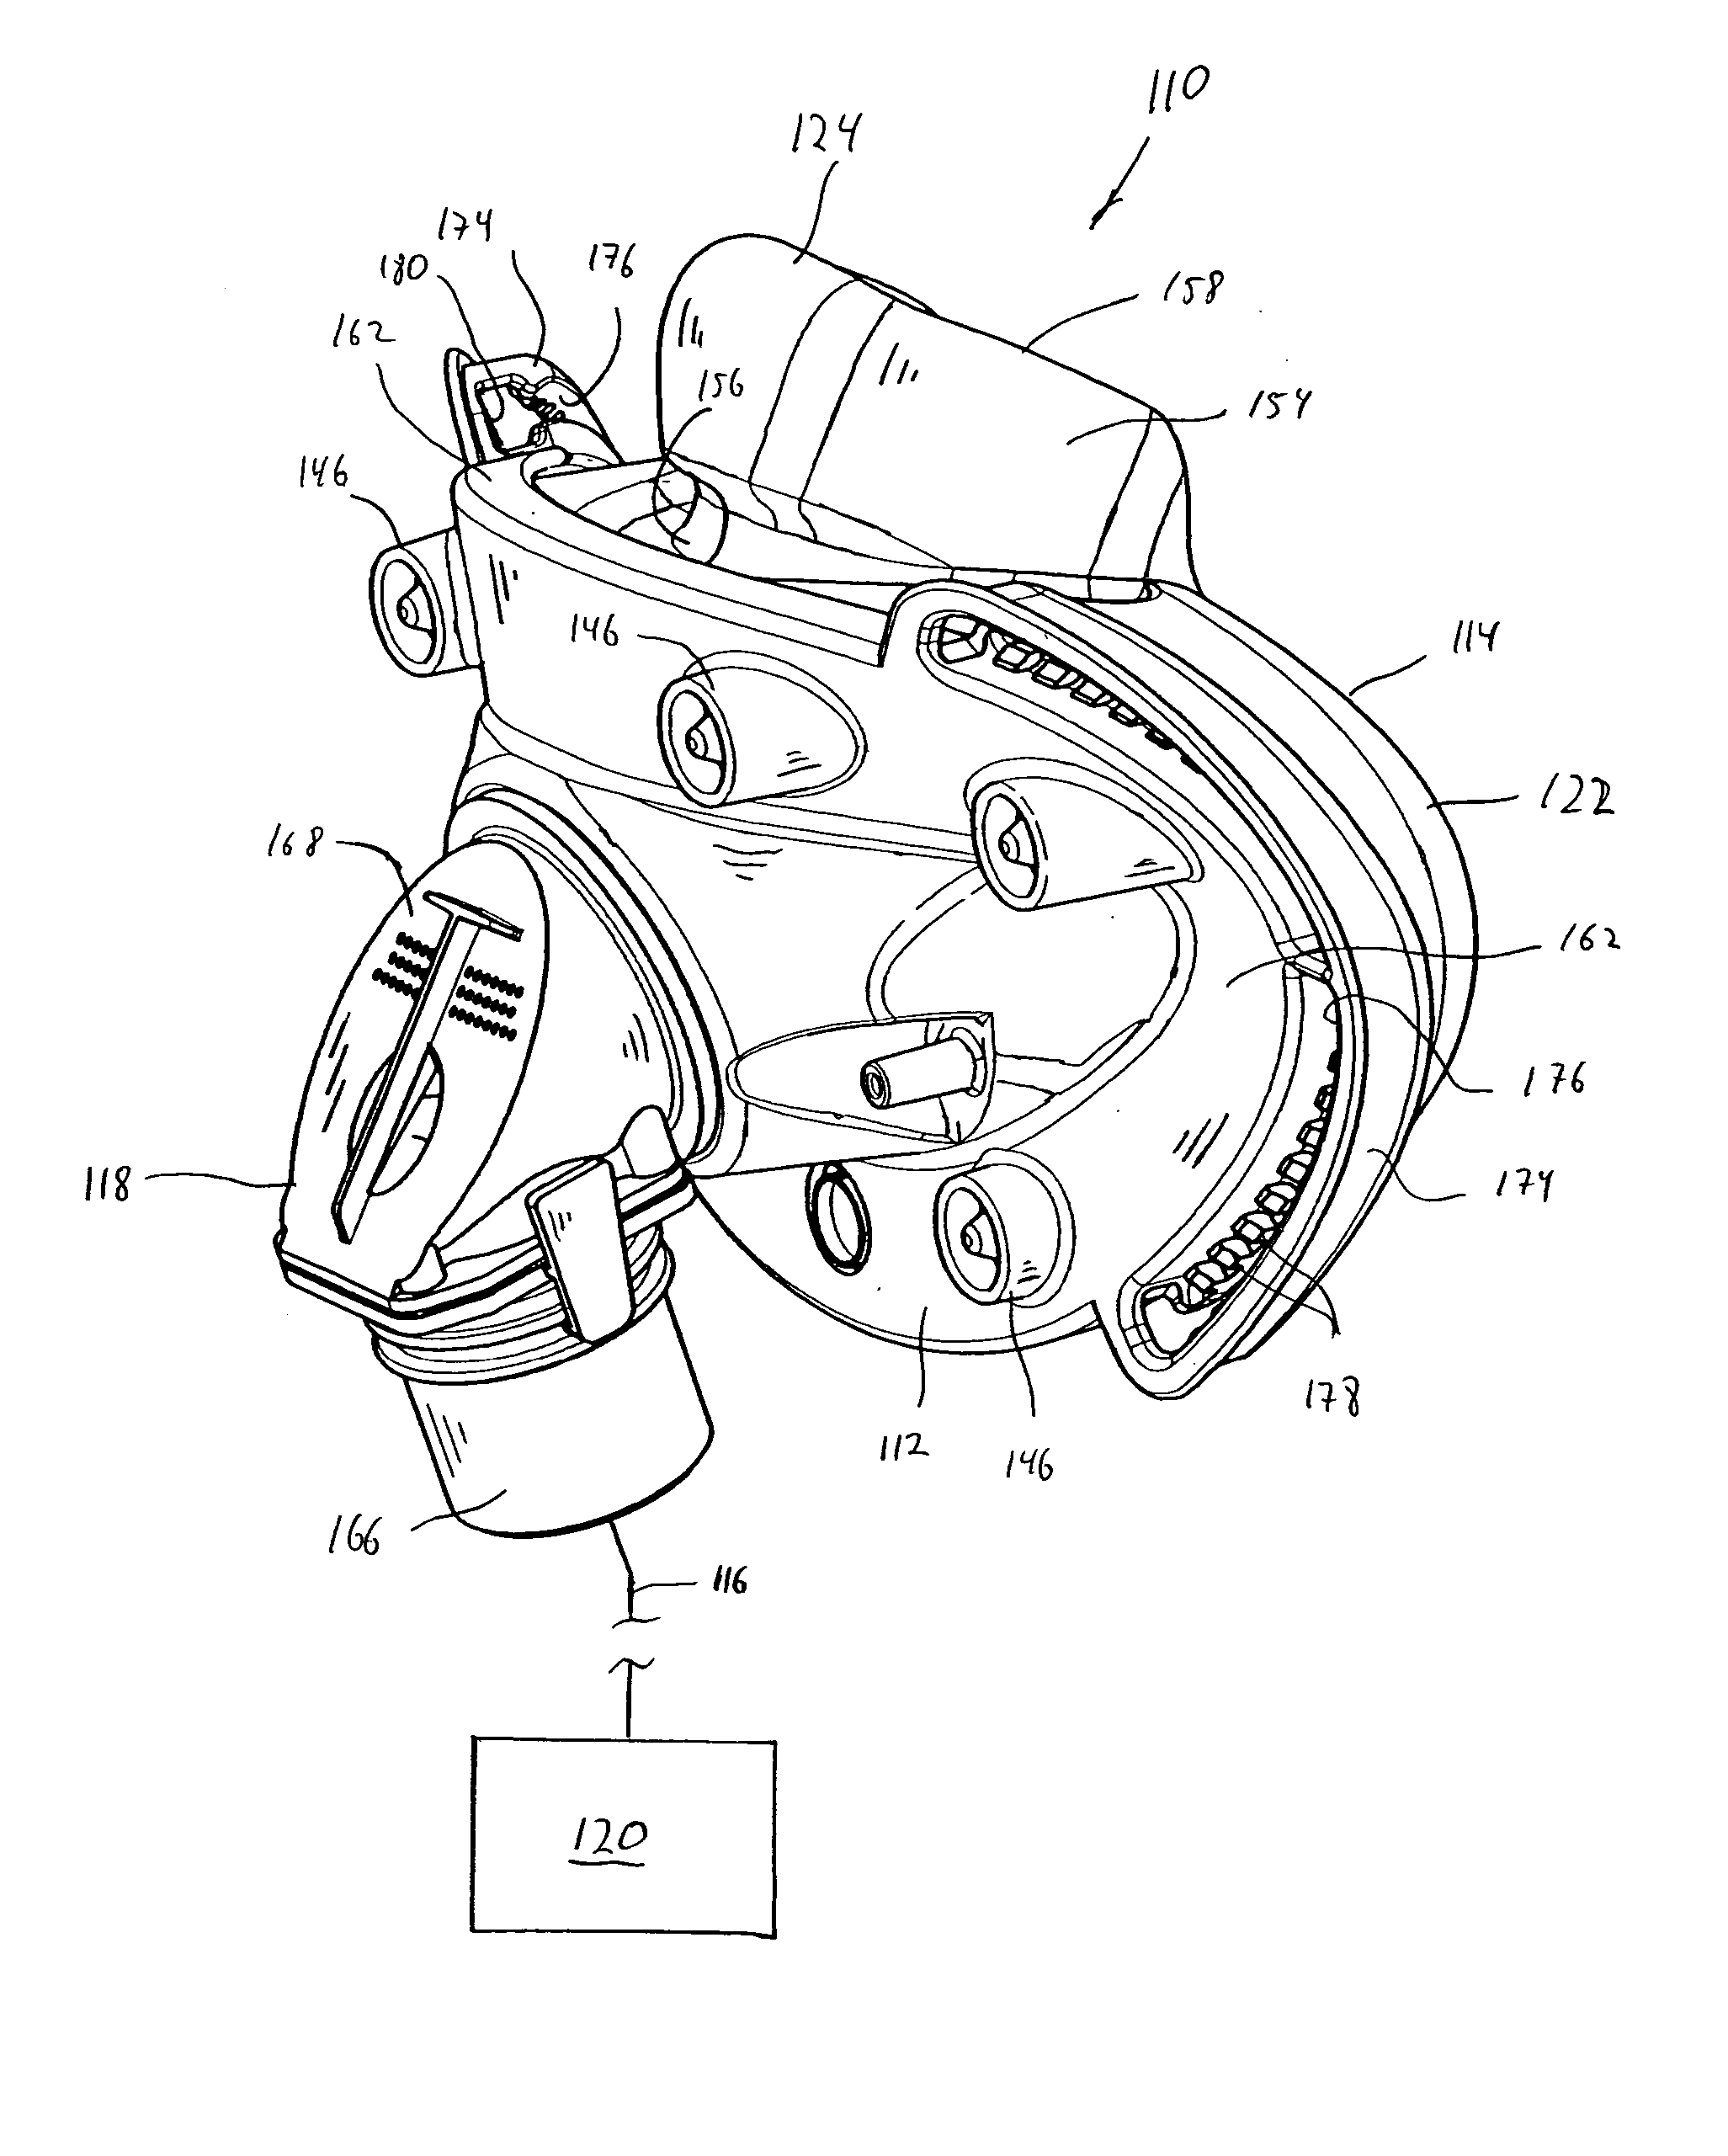 Full face respiratory mask with integrated nasal interface